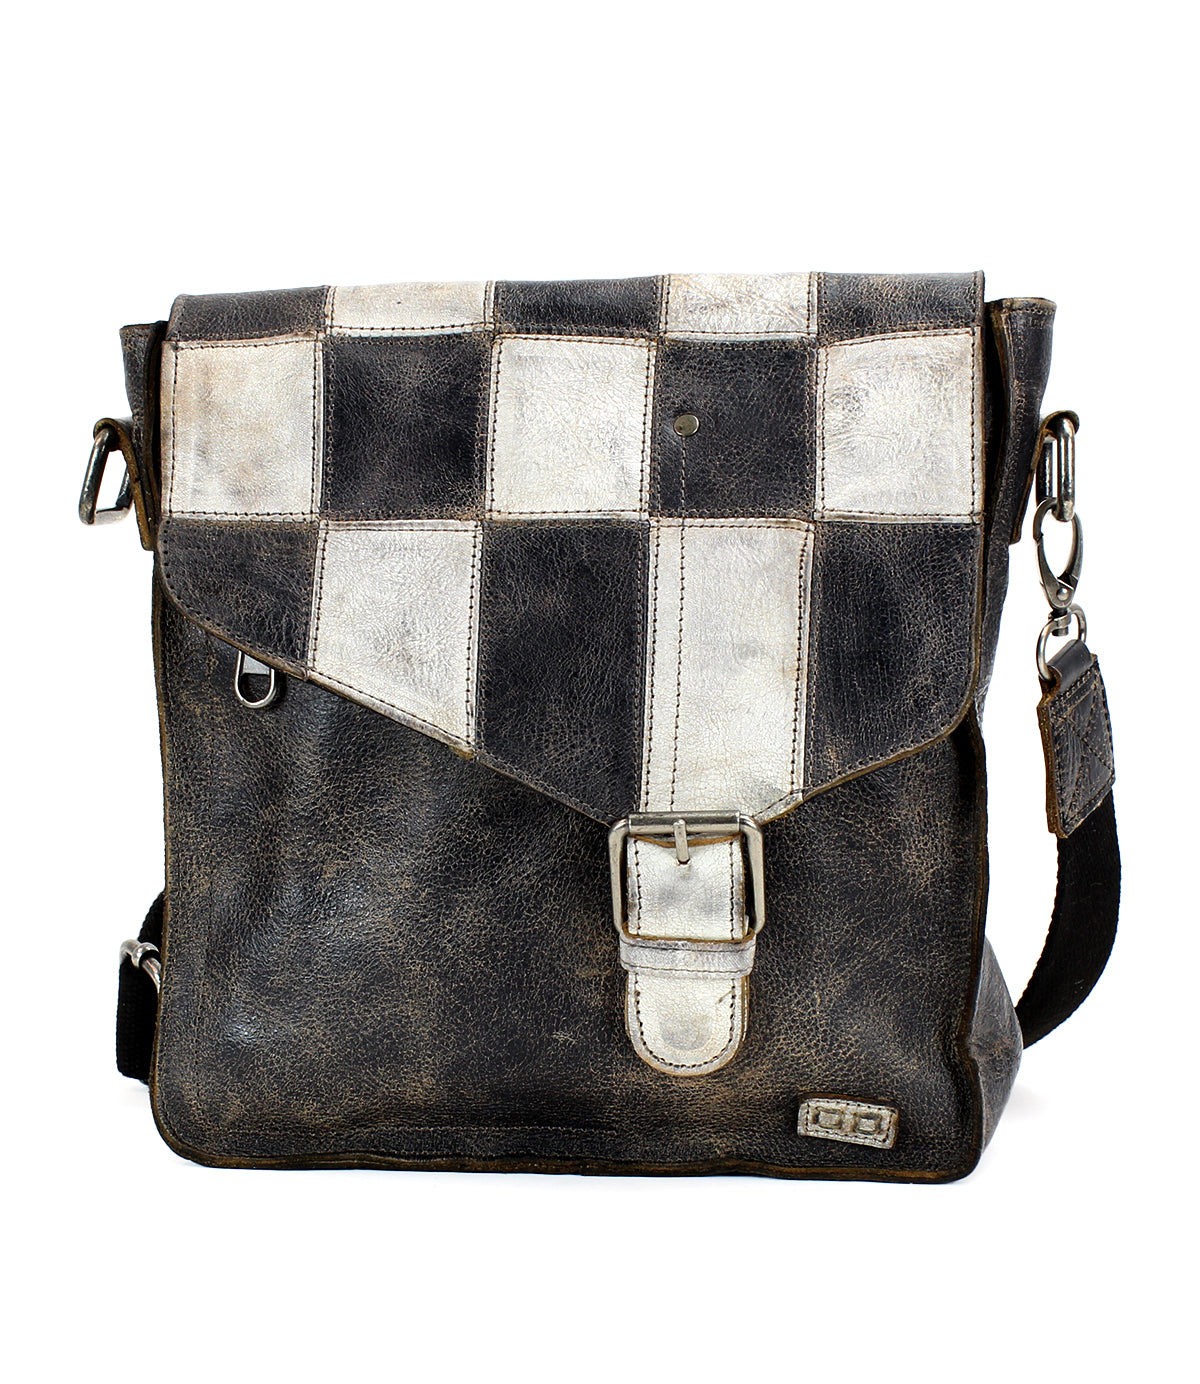 Black and white checkered leather messenger bag with a Bed Stu Venice Beach II front panel closure and adjustable shoulder strap, isolated on a white background.